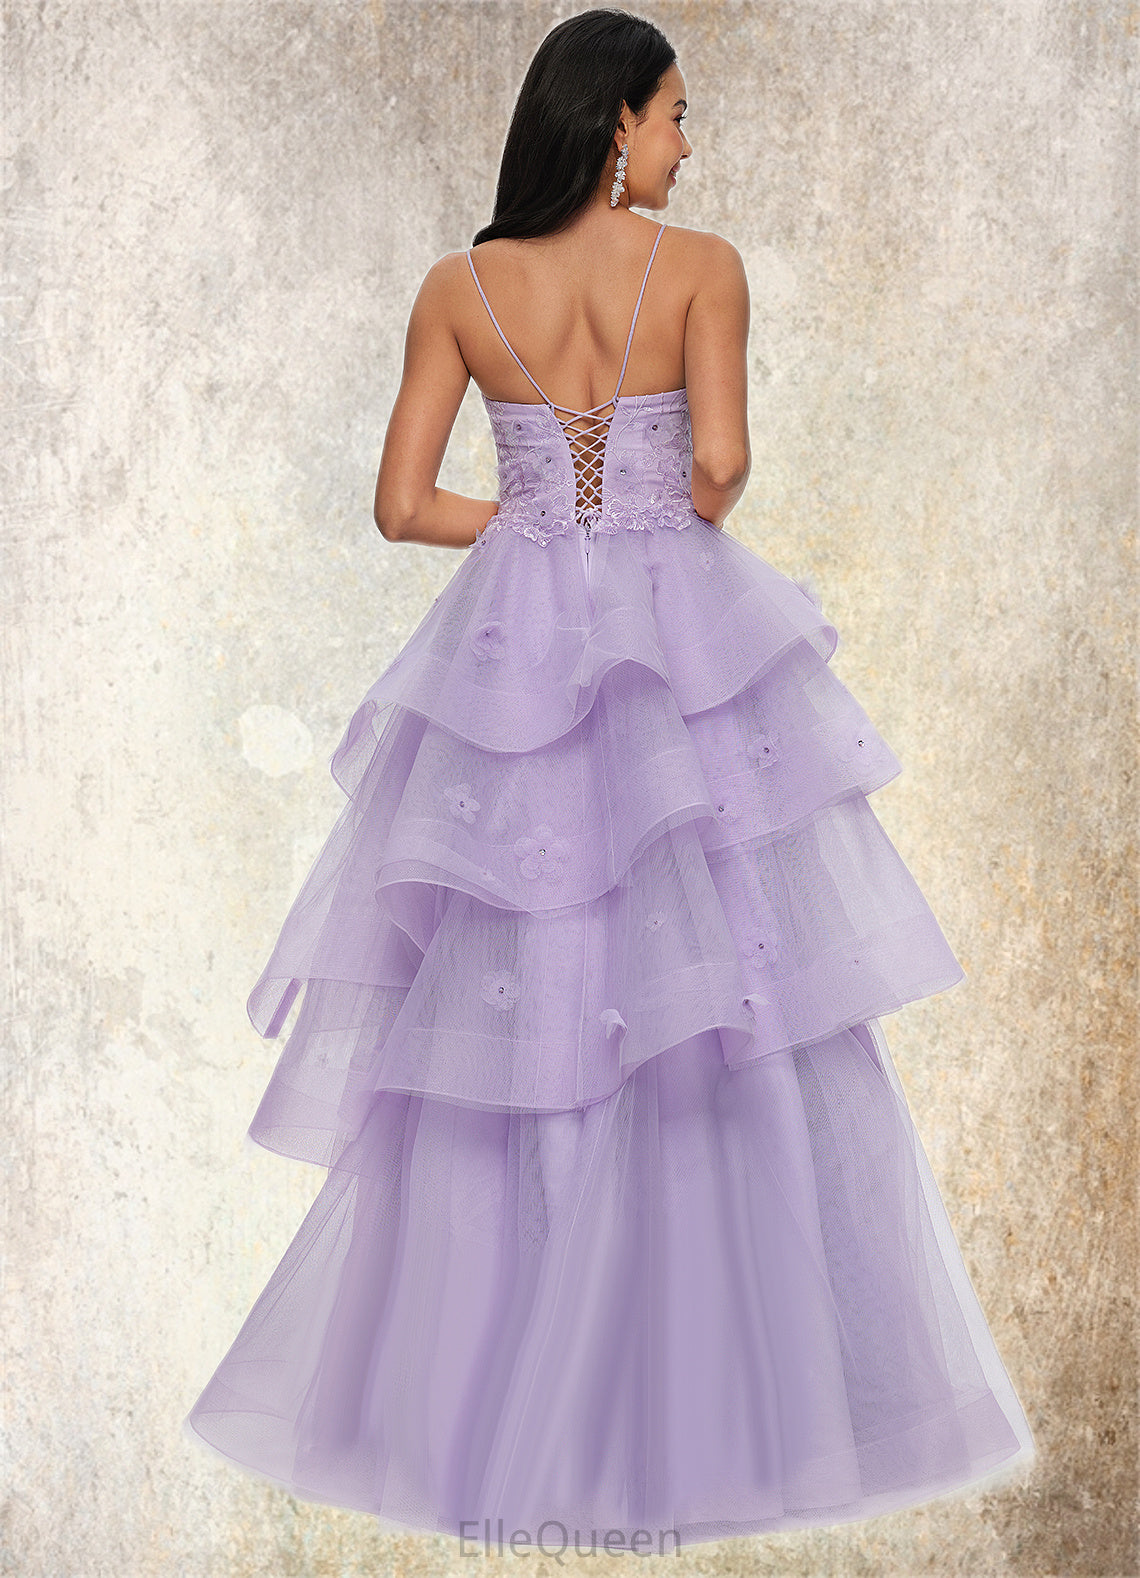 Leilani Ball-Gown/Princess Sweetheart Floor-Length Tulle Prom Dresses With Beading Sequins DGP0022204